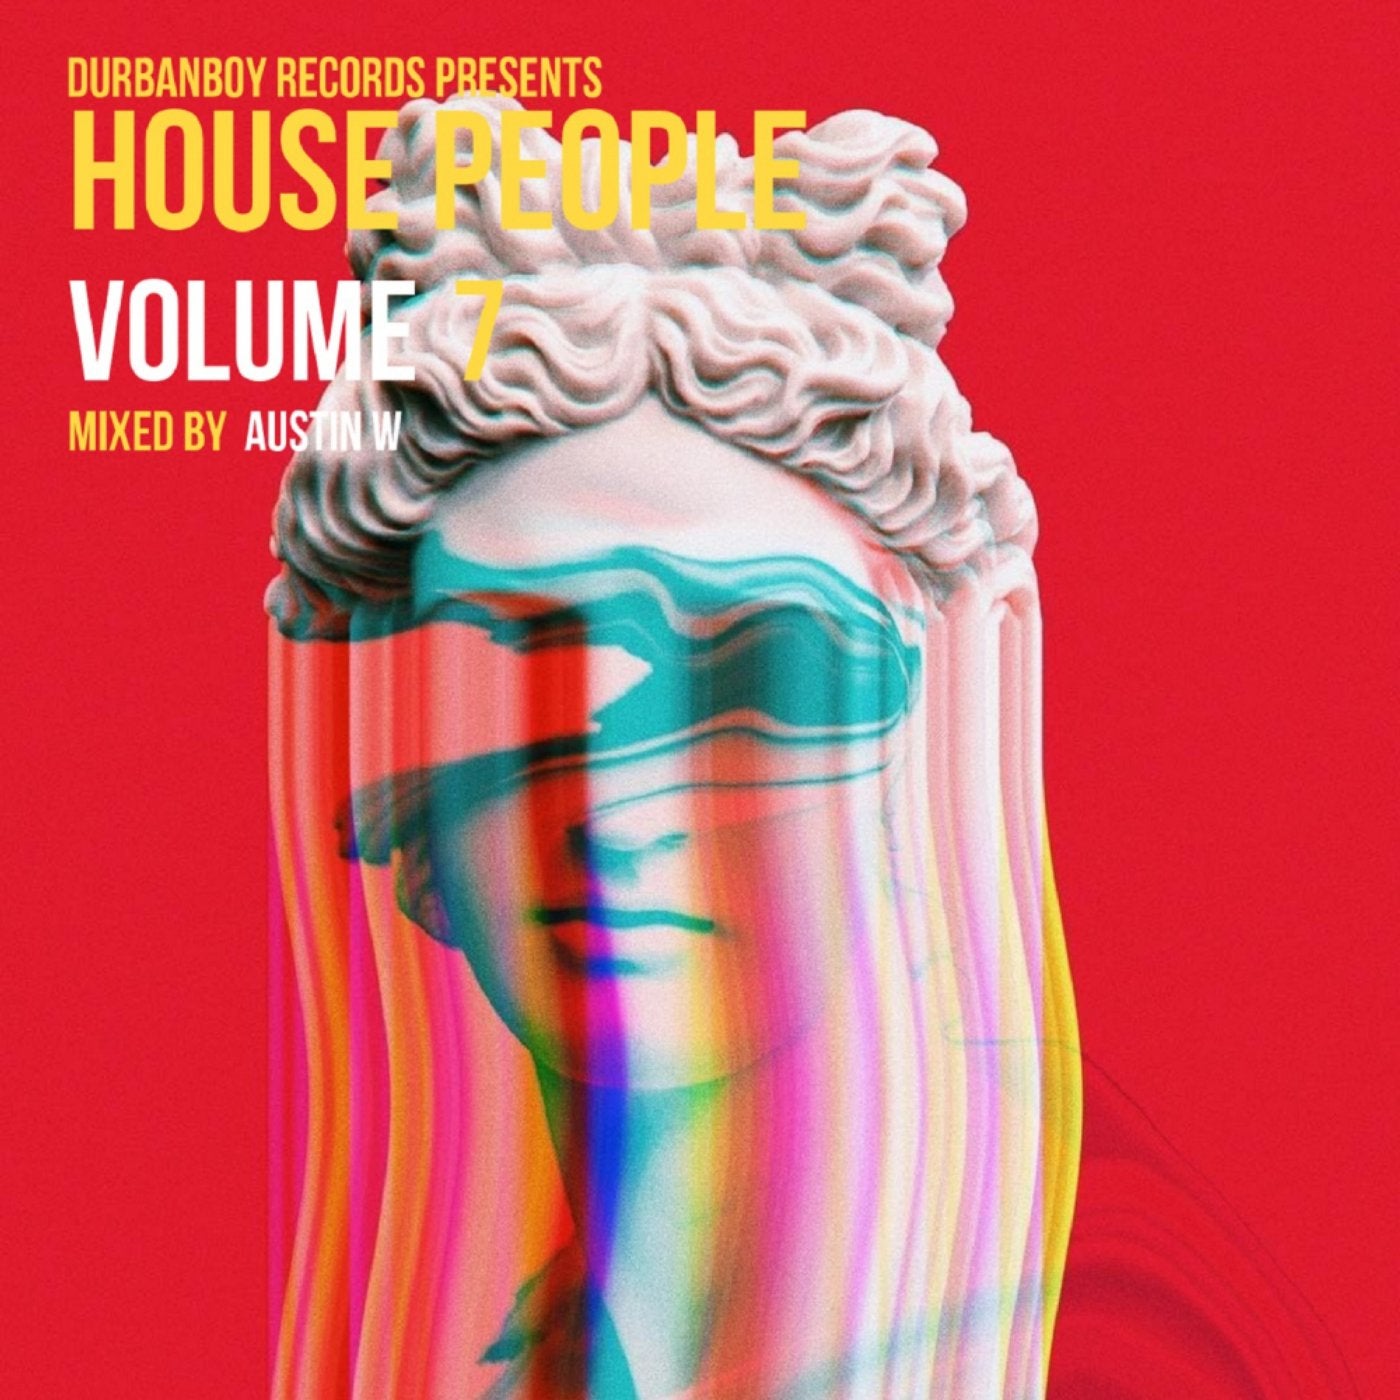 House People, Vol. 7 (Mixed & Compiled by Austin W)